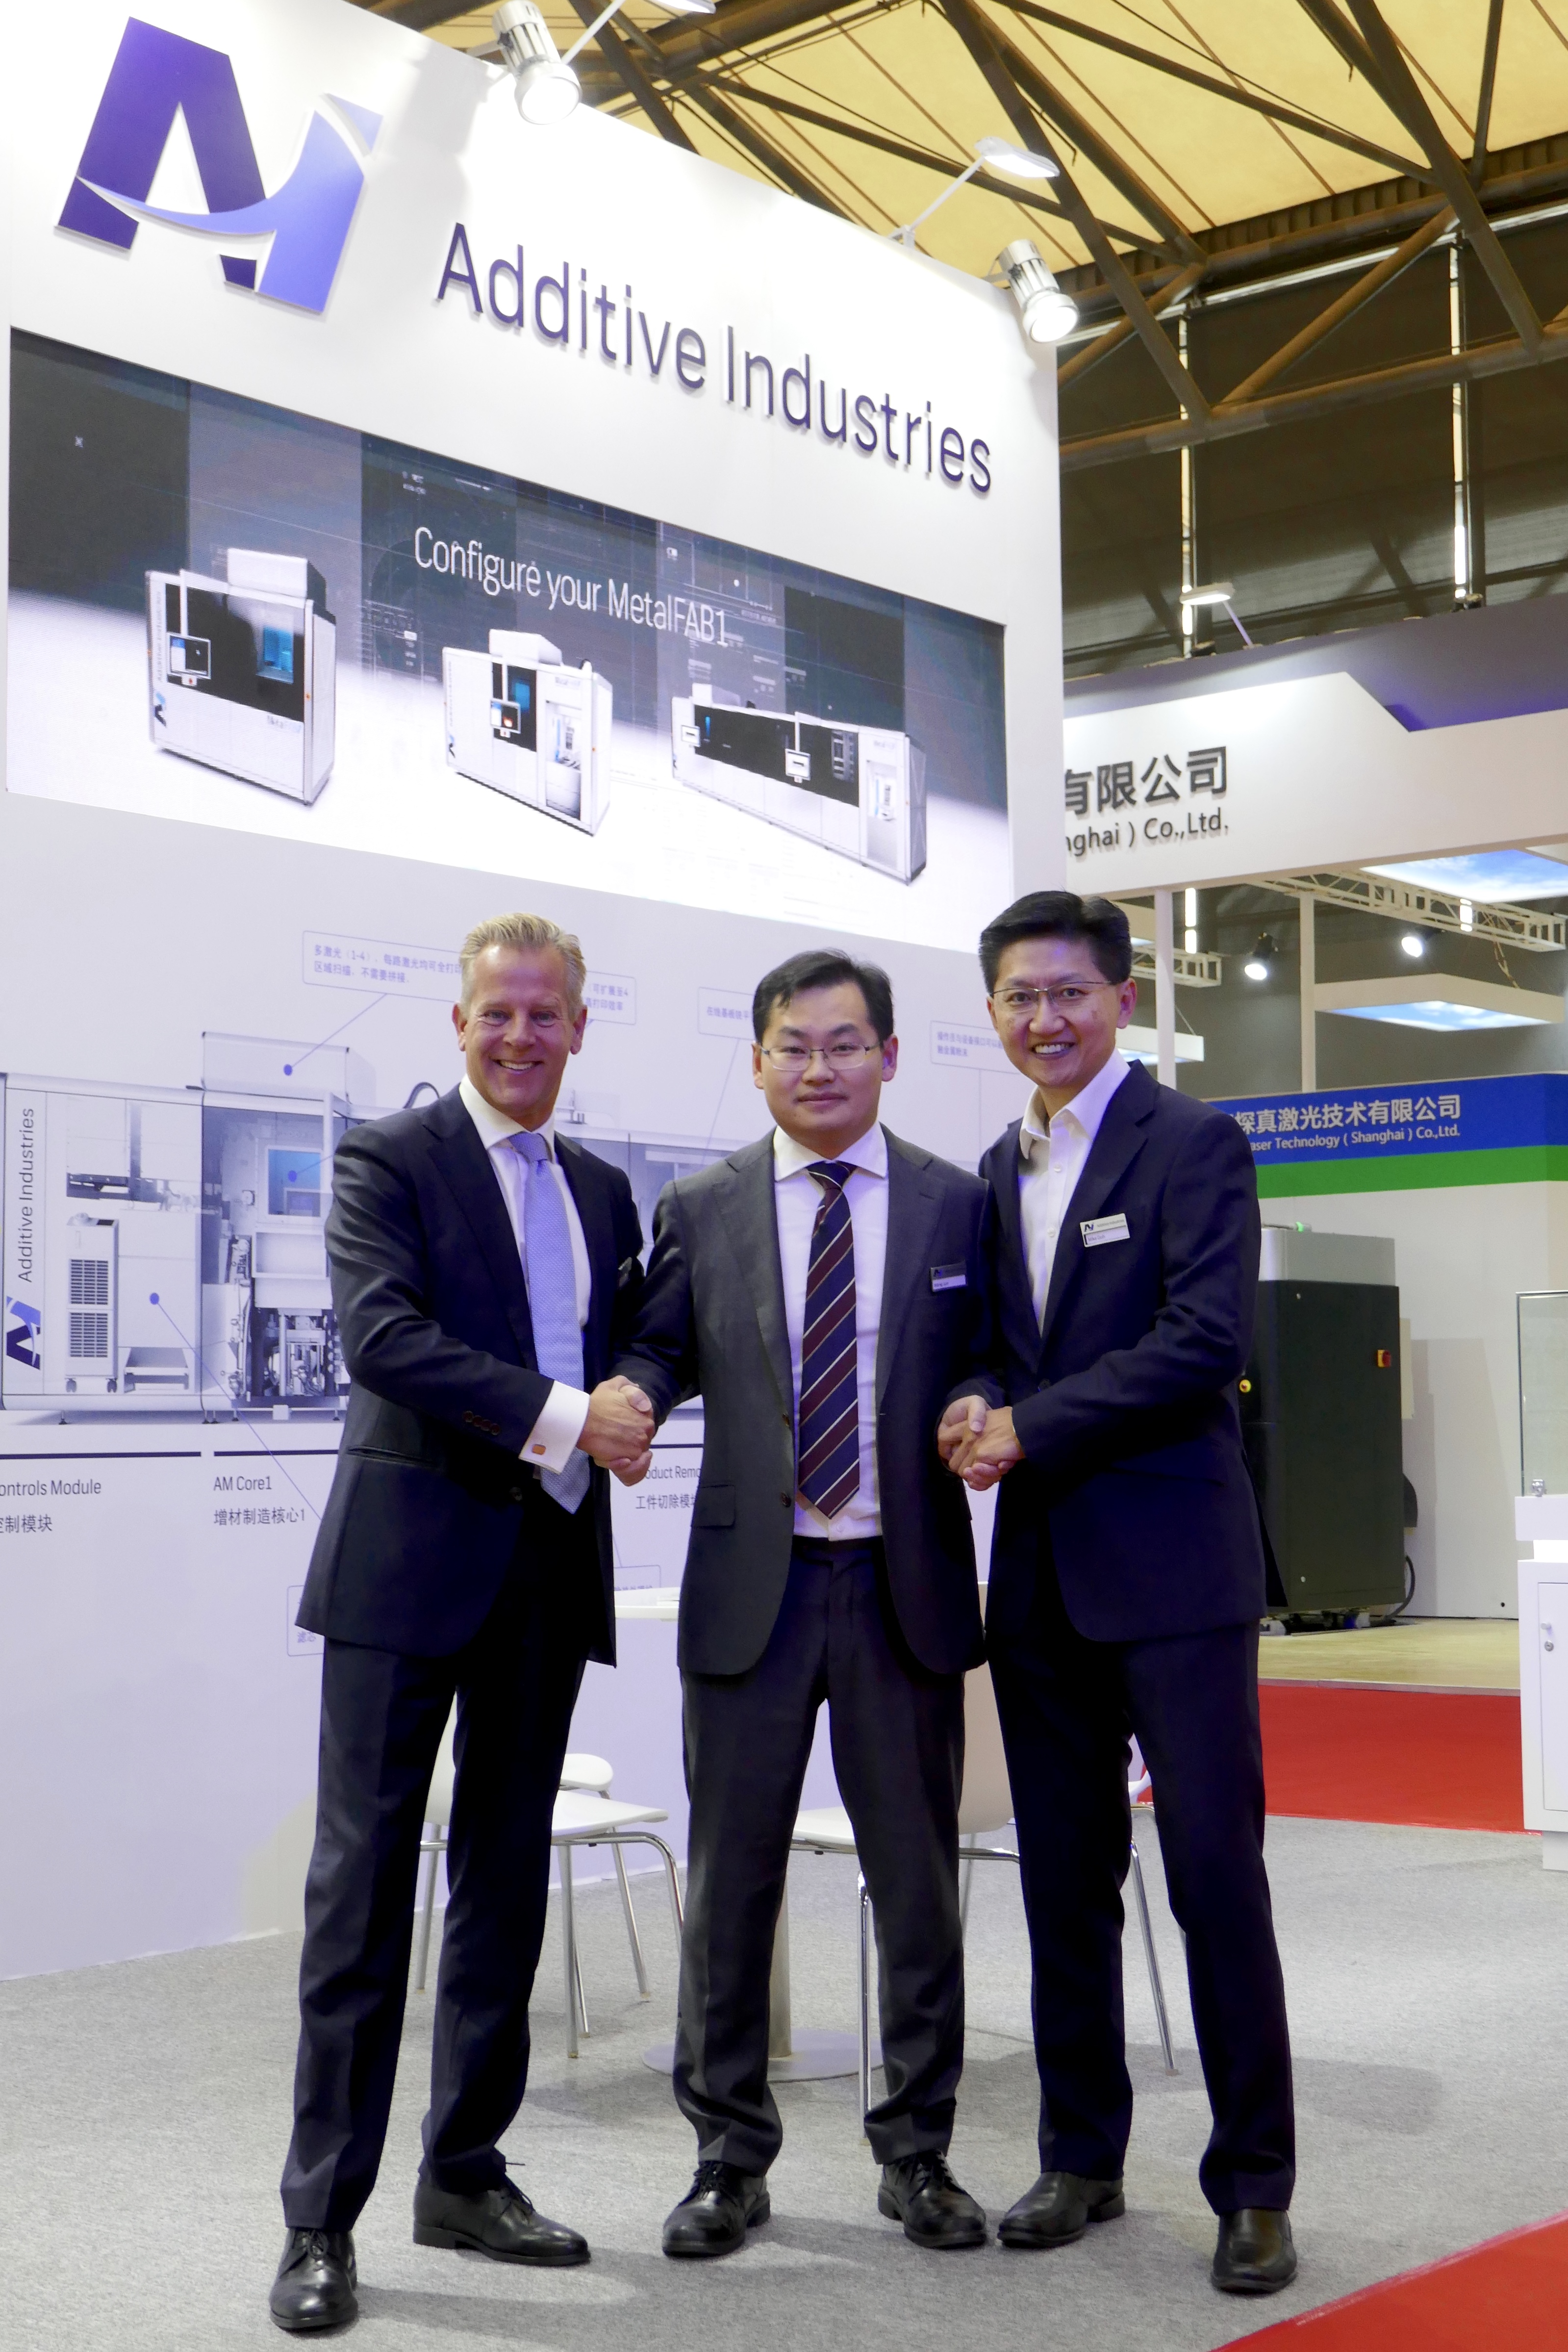 From left to right: Bart Leferink, director global channel sales, Additive Industries, Wang Jun, general manager, Sinsun-Tech Corporation Ltd and Mike Goh, general manager, Additive Industries Asia Pacific Pte Ltd.